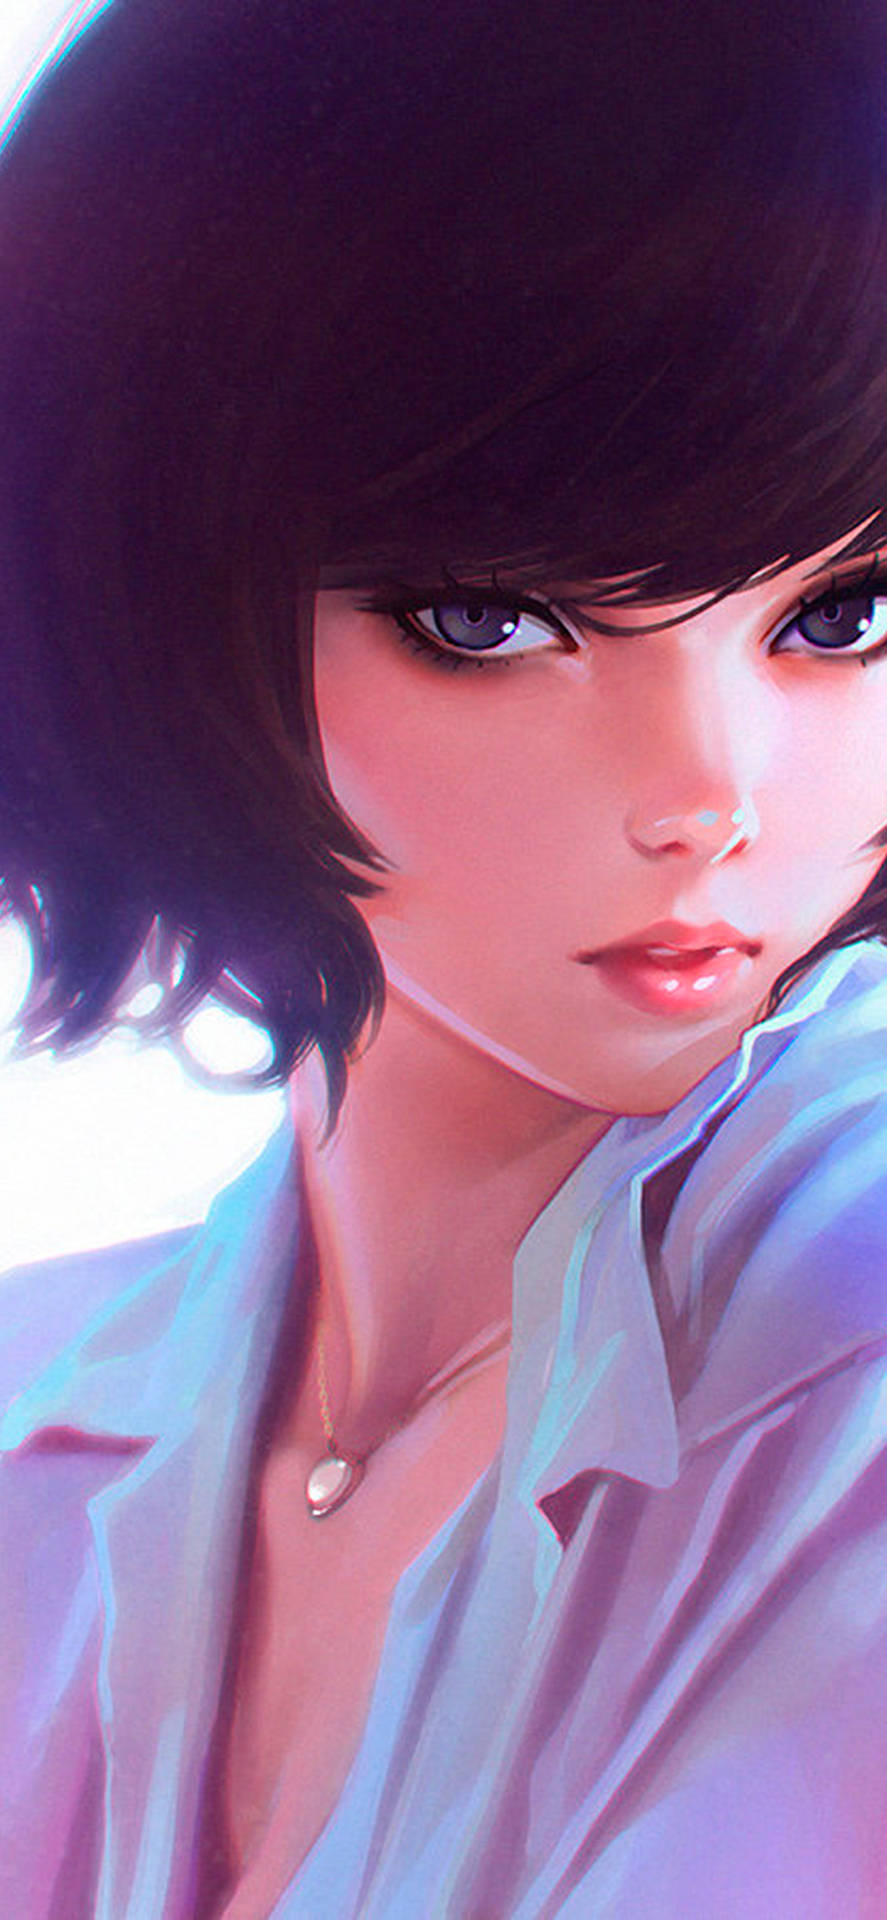 A Girl With Short Hair Background